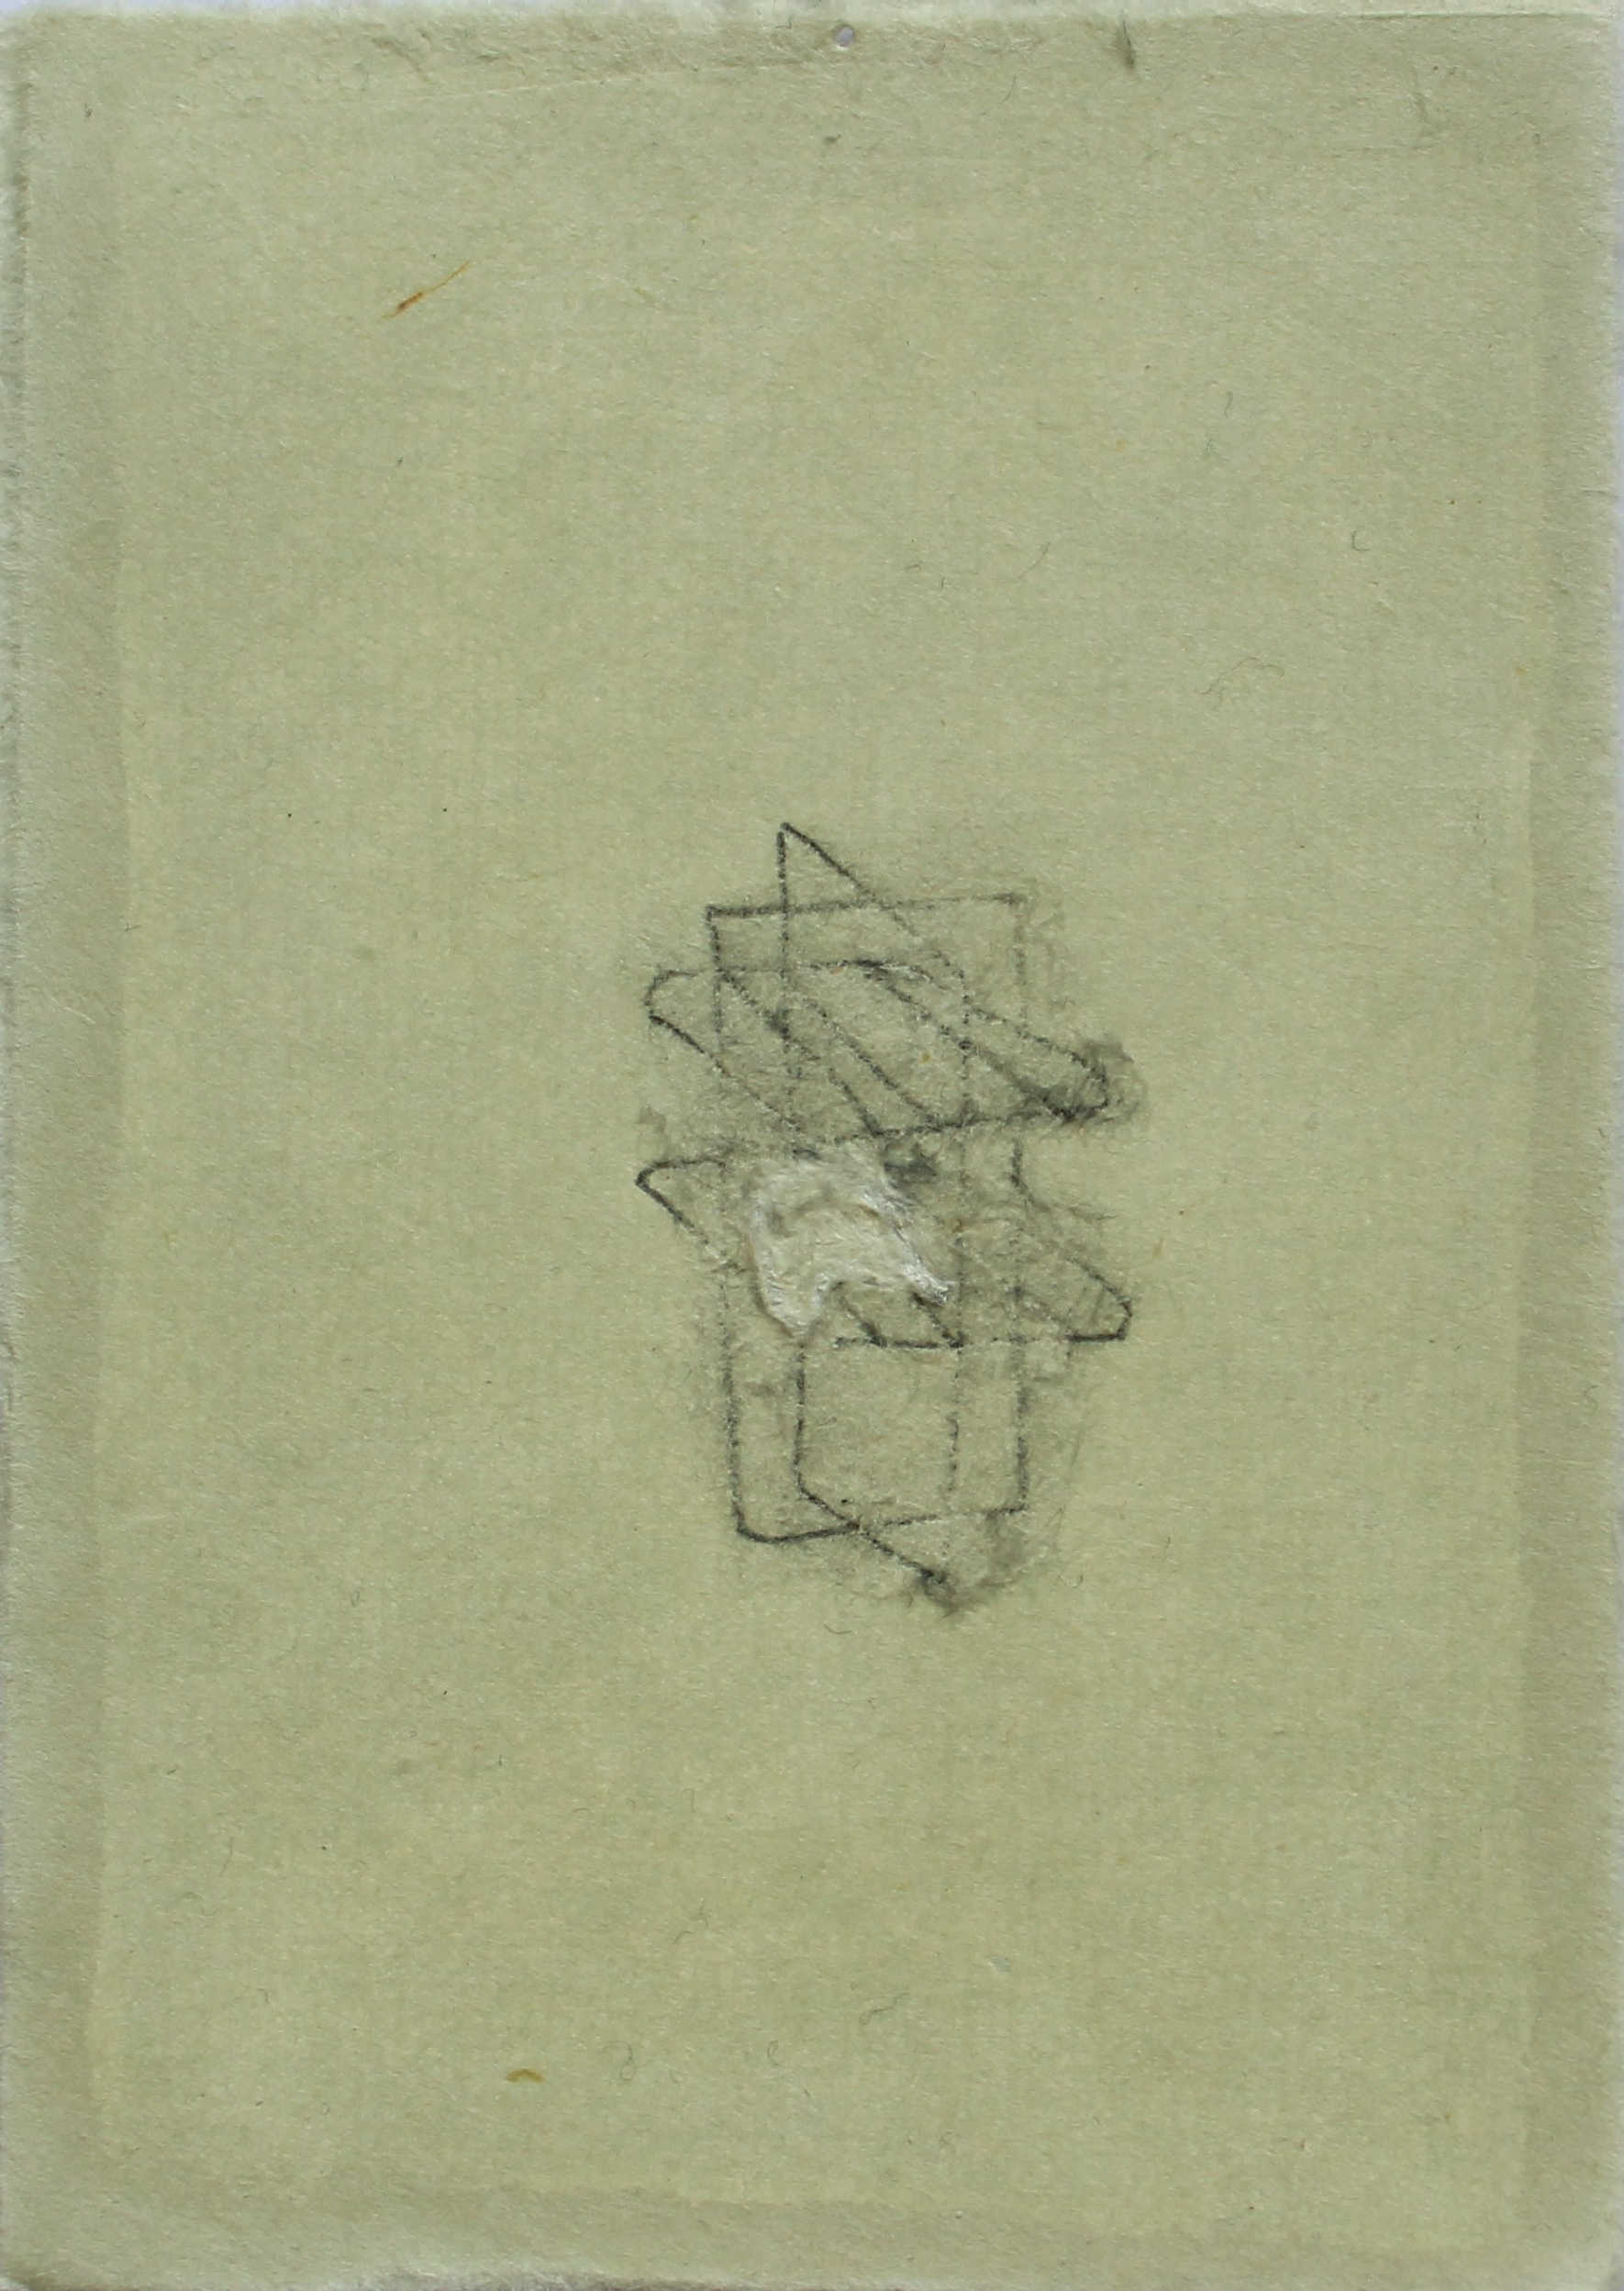 A drawing of potato starch placed on a clothes airer, the airer is drawn with 2B pencil on washi paper, and the starch is white and scratched into the paper.